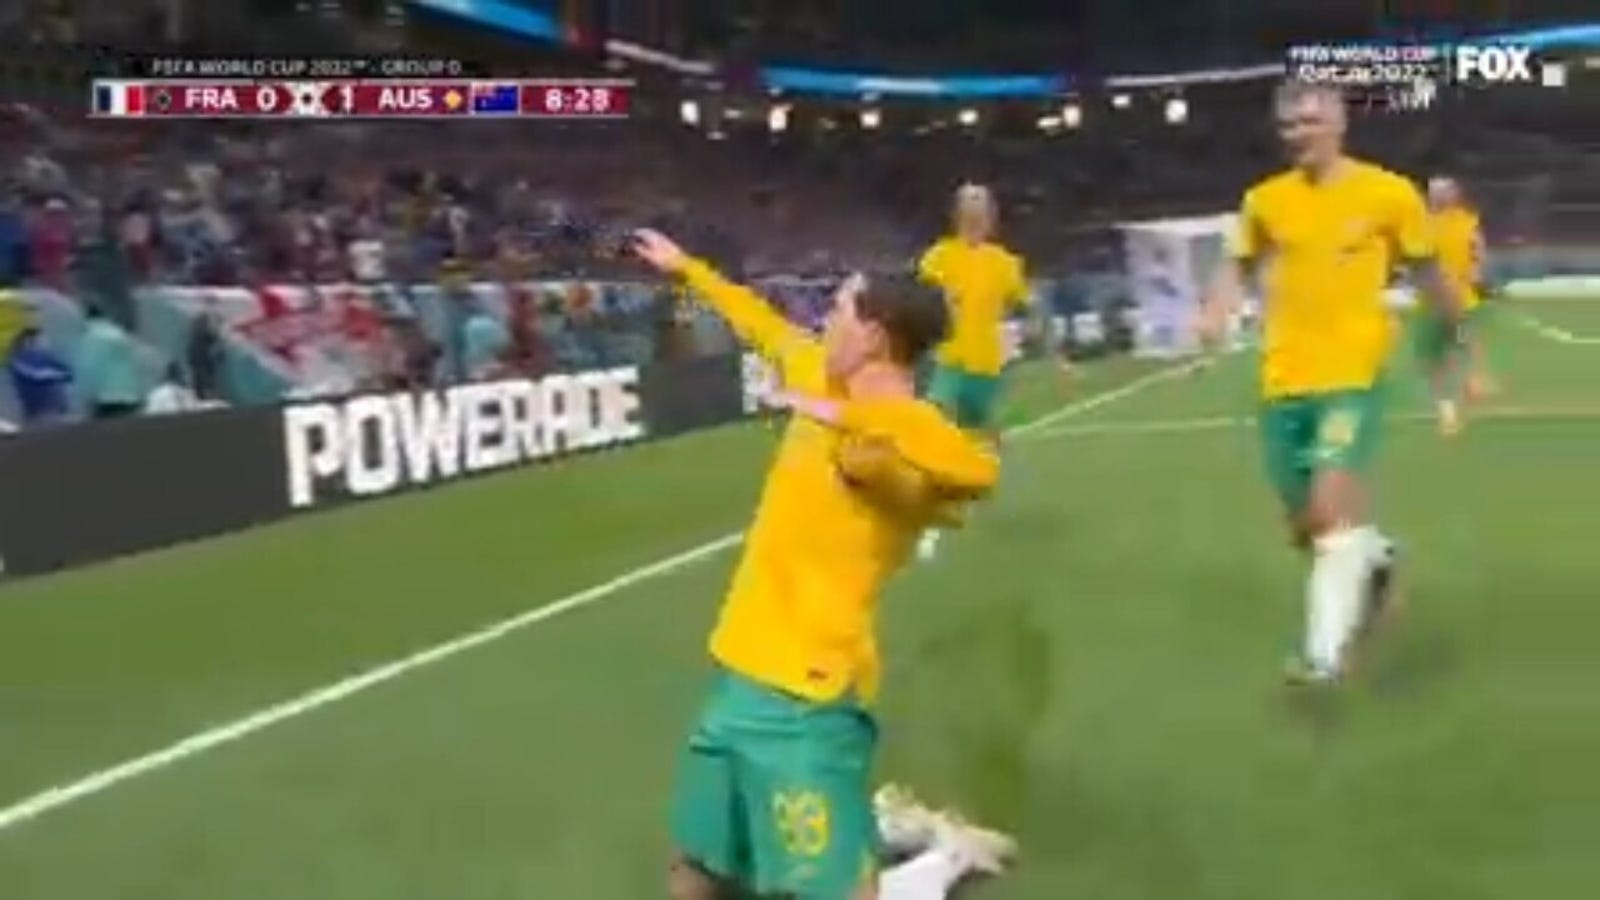 Craig Goodwin strikes first in the 9th minute, giving Australia a 1-0 lead over France 